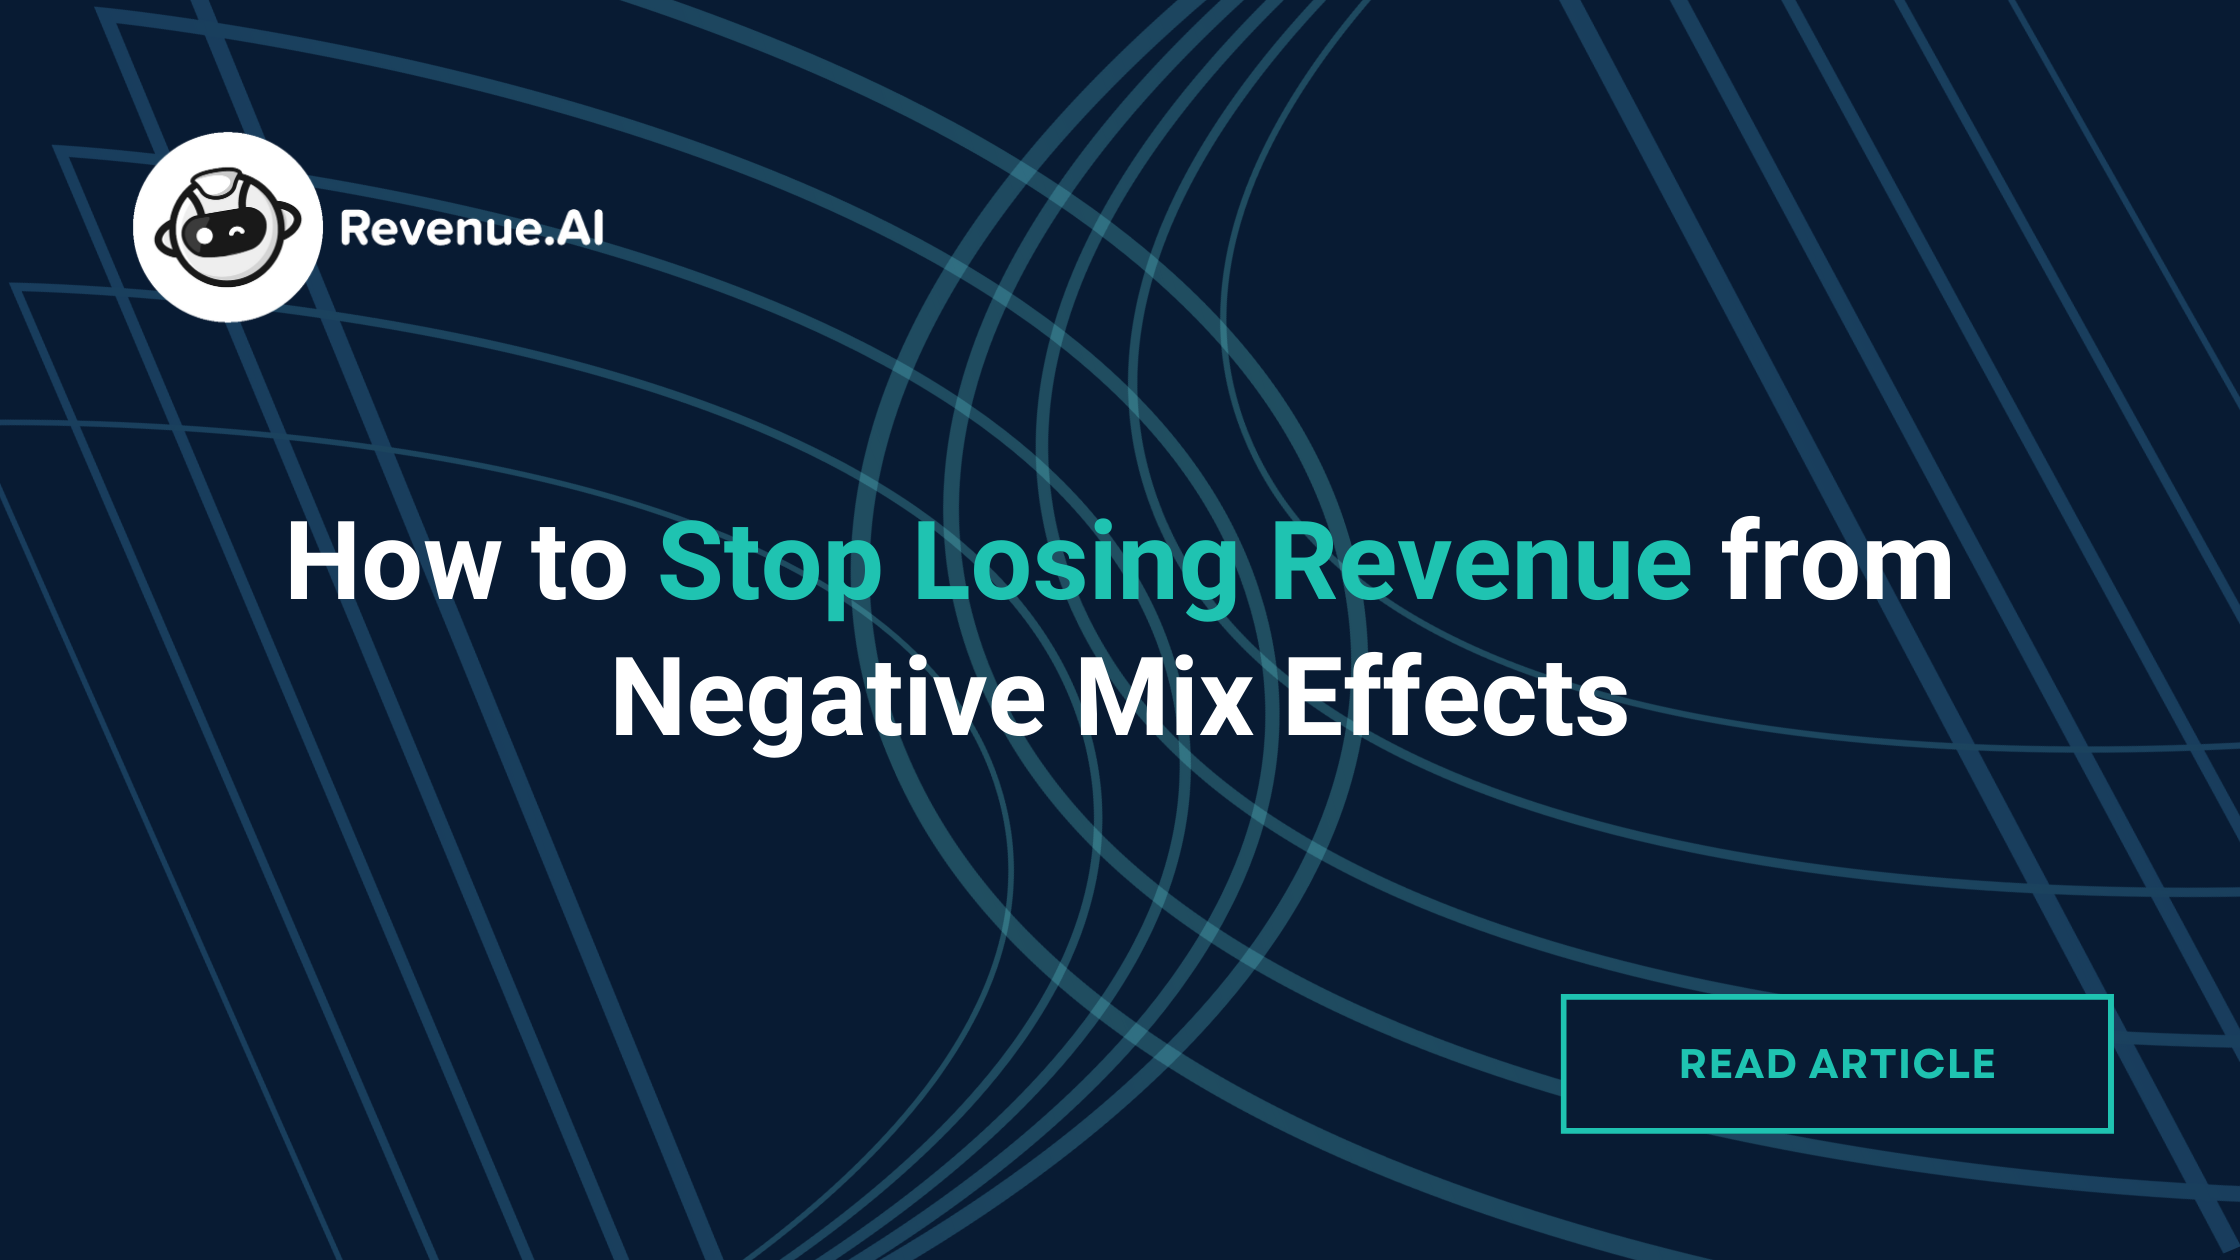 How to stop losing revenue from mix imbalances